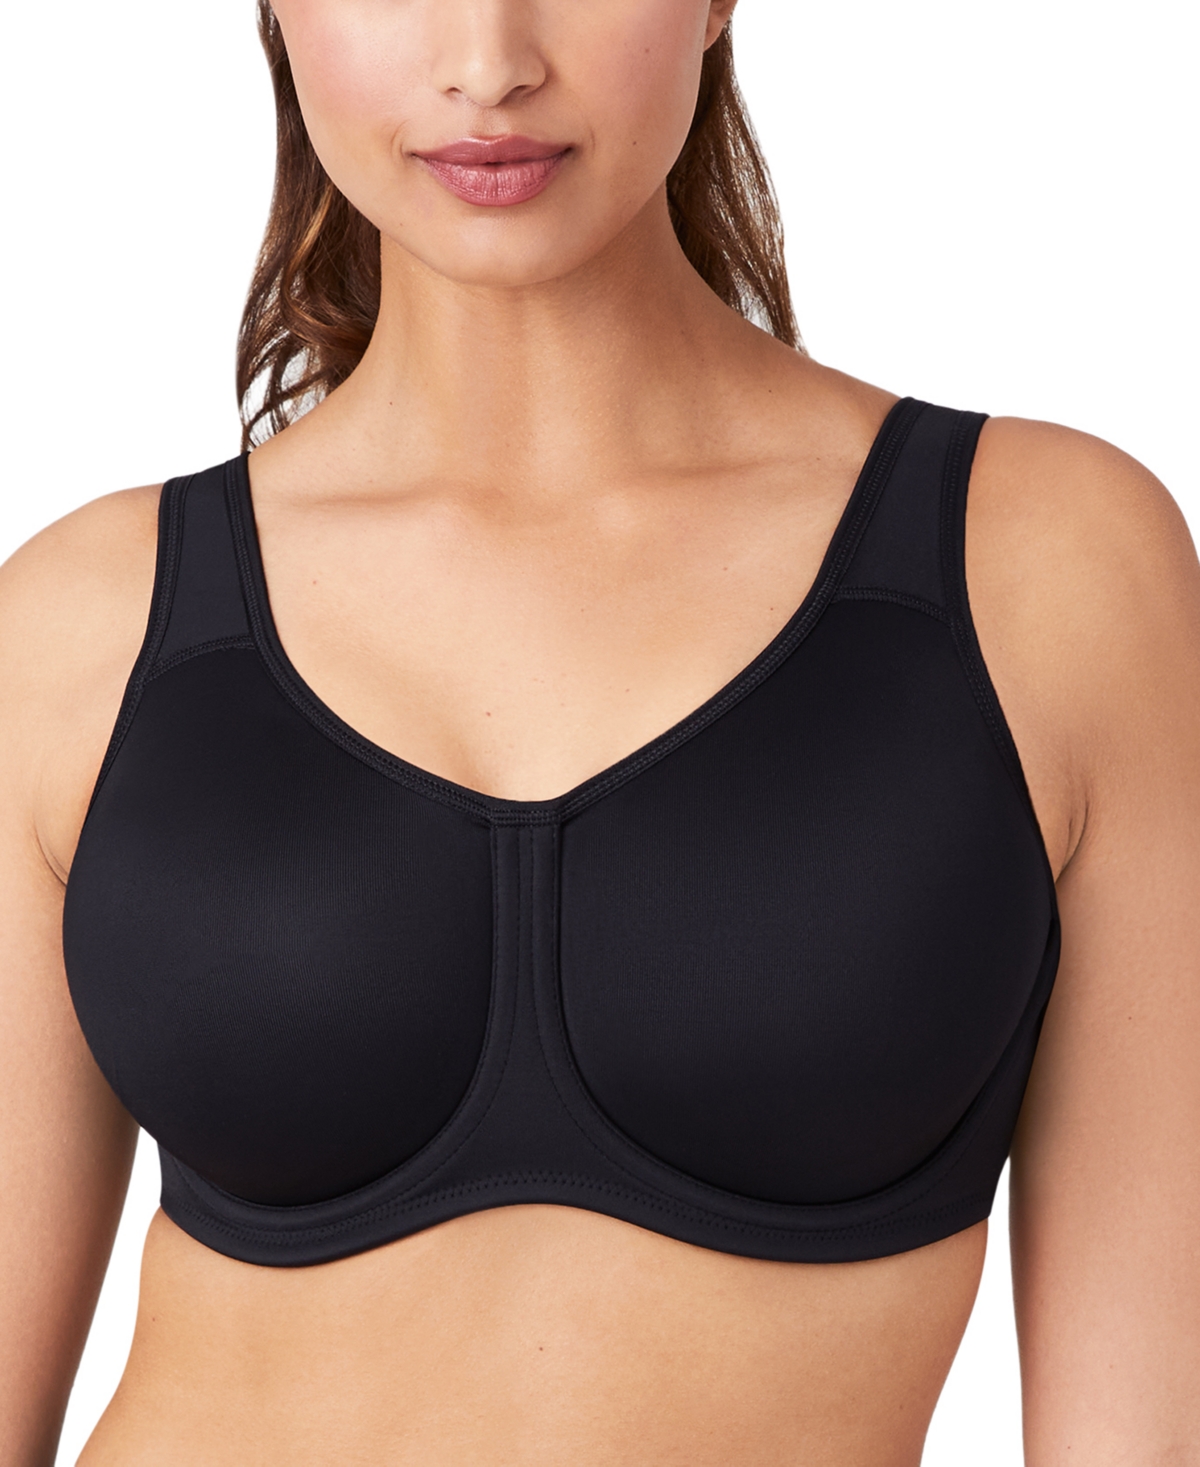 UPC 012214852634 product image for Wacoal Sport High-Impact Underwire Bra 855170, Up To I Cup | upcitemdb.com